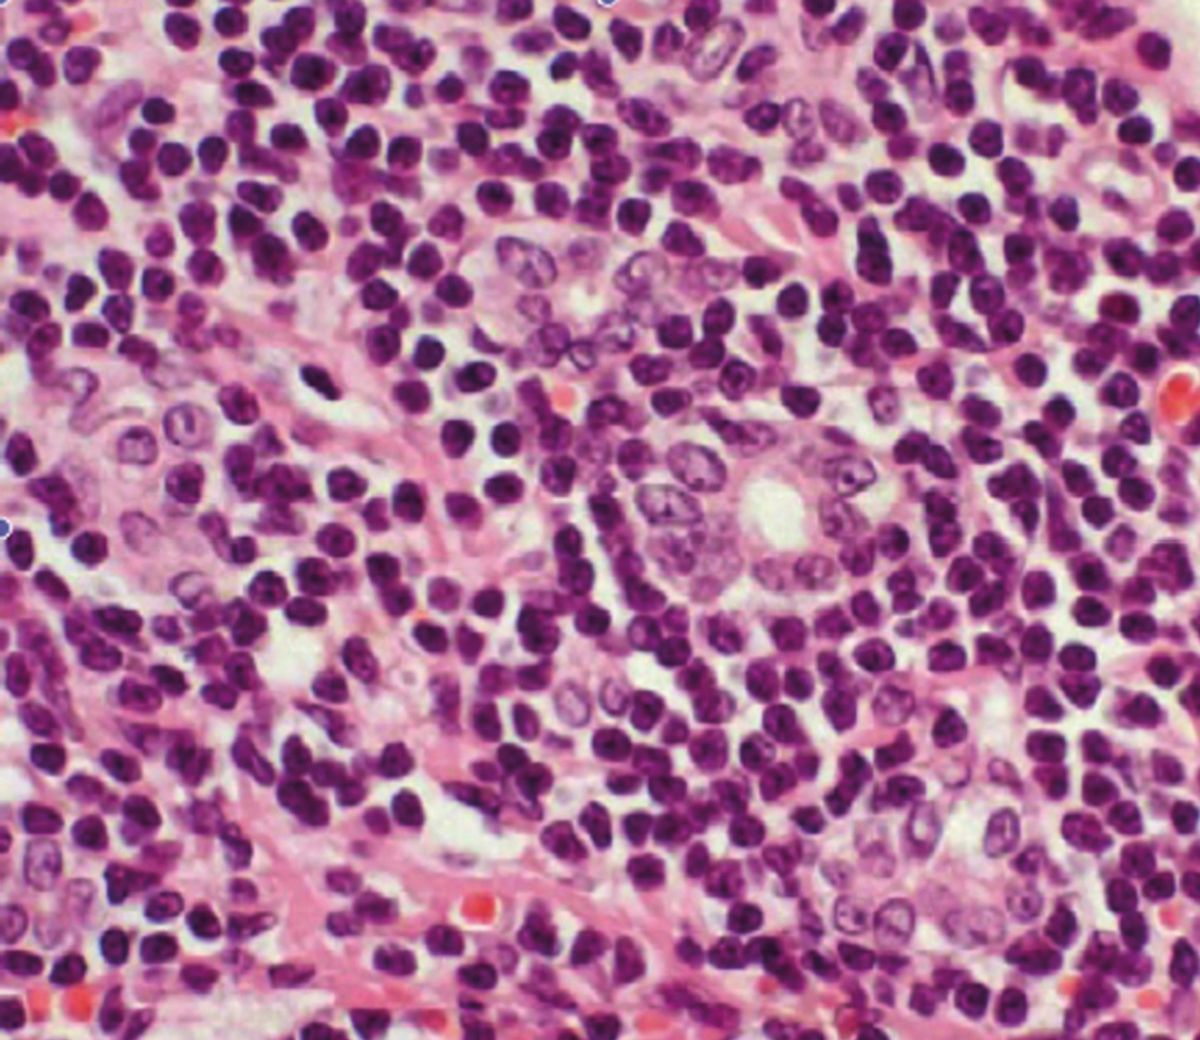 Histopathology of a cat’s liver with lymphocytic cholangitis. Note the marked infiltration of small lymphocytes in the portal area and concurrent biliary proliferation.